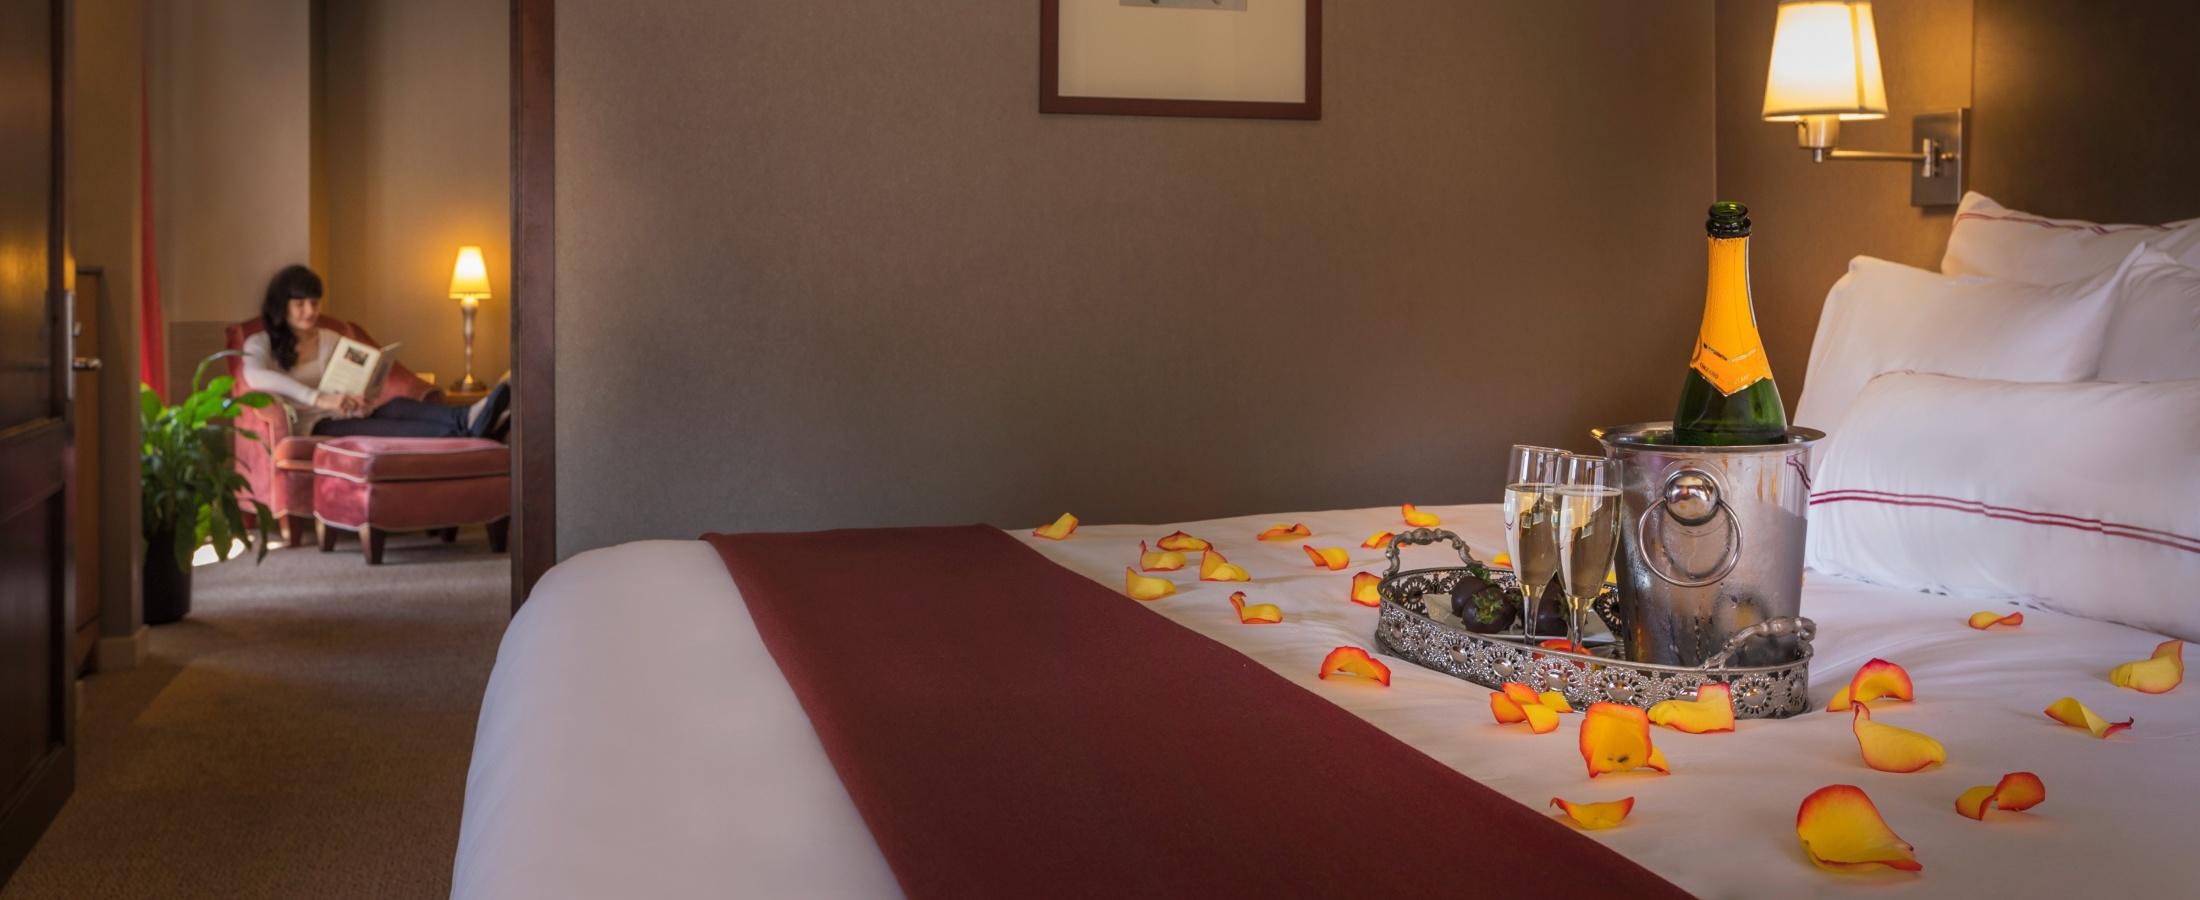 Rose petals, prosecco and chocolate strawberries set up on bed